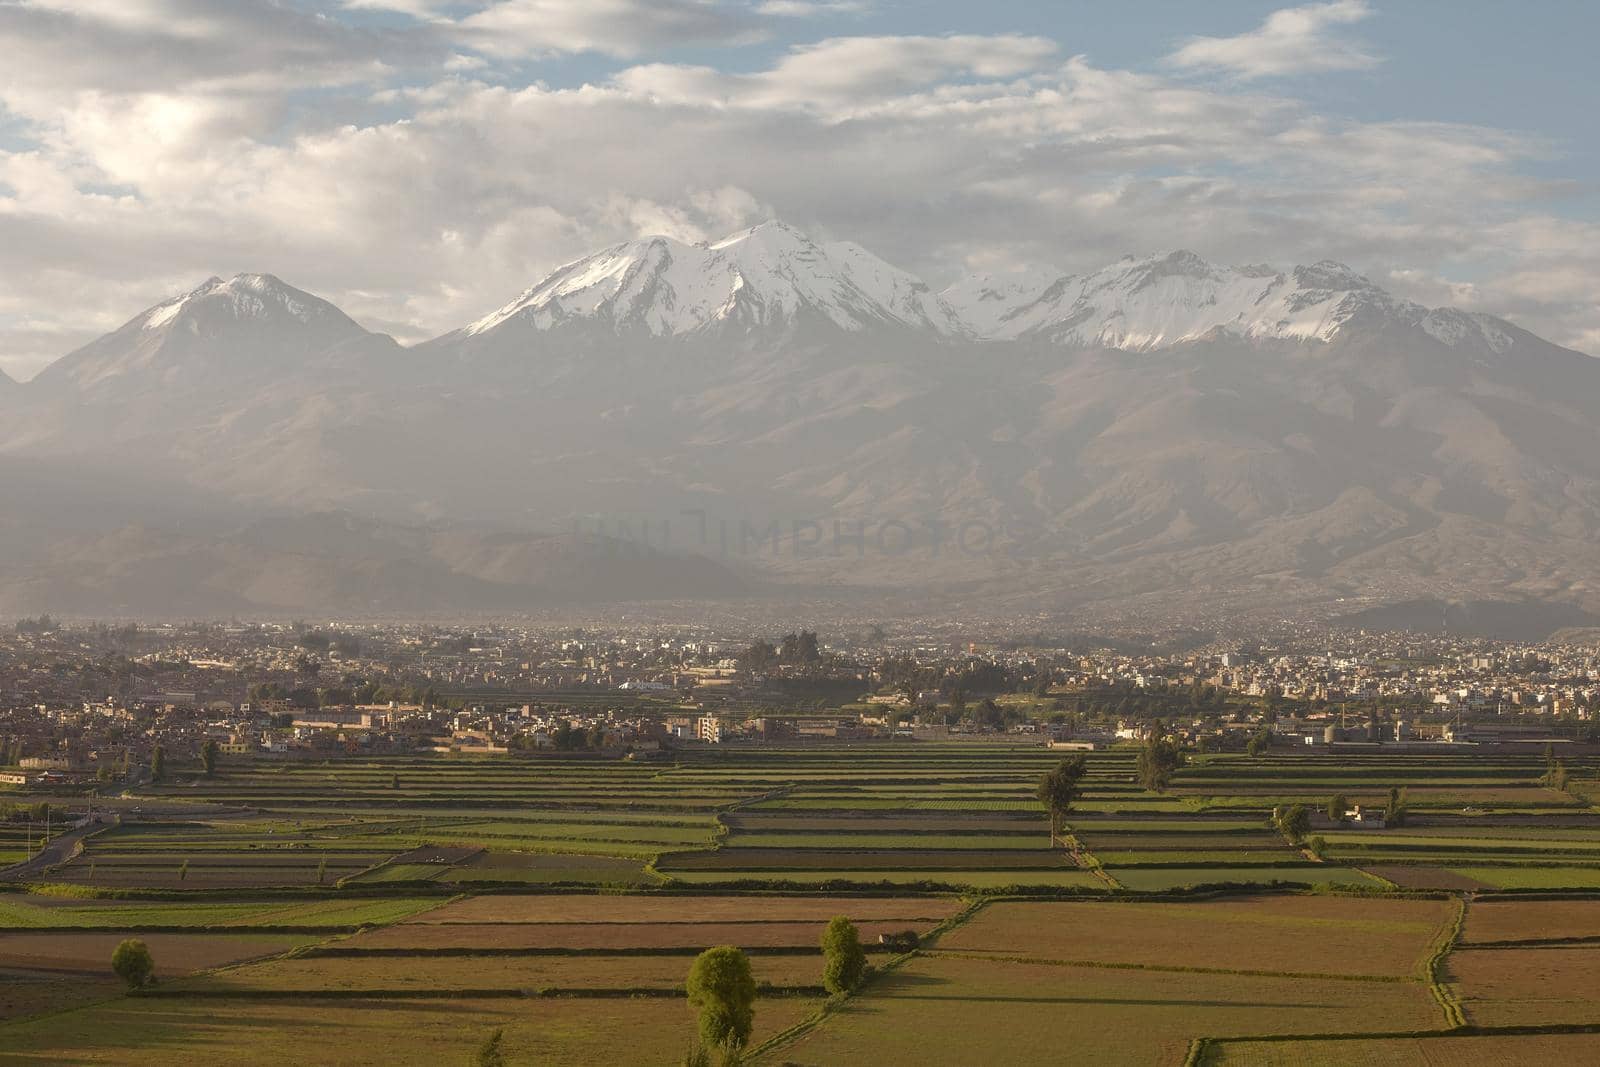 City of Arequipa, Peru with its iconic fields and volcano Chachani in the background